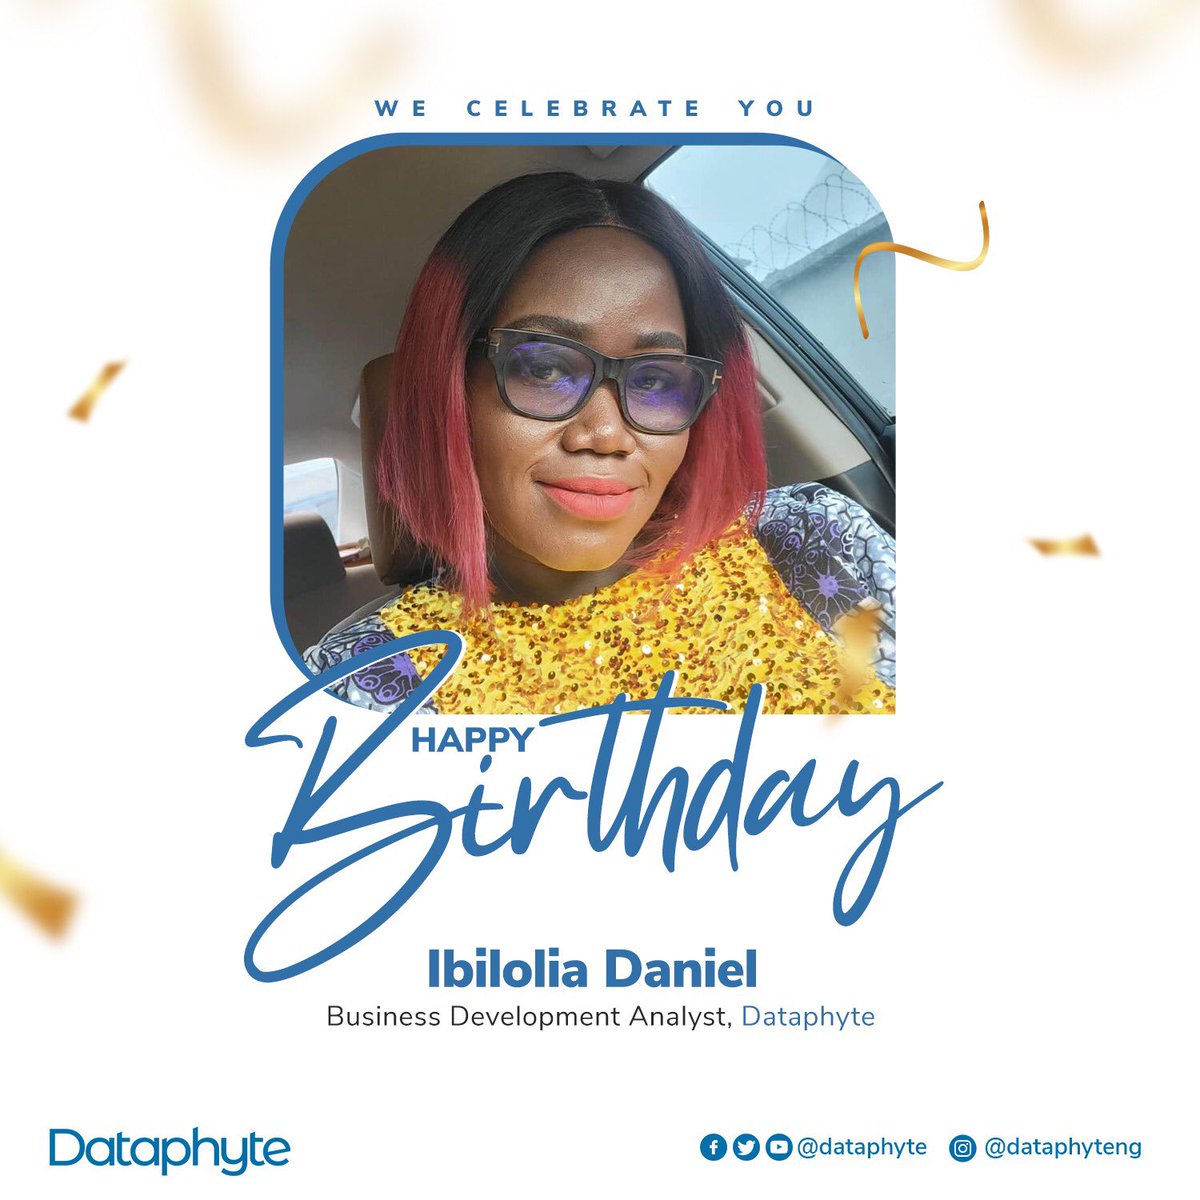 Dear @saltypip , Happy Birthday! We at Dataphyte are incredibly grateful for everything you’ve done as our Business Development Analyst. Your hard work, dedication, and positive spirit have made a huge impact on our team and our growth. Here’s to celebrating you today and